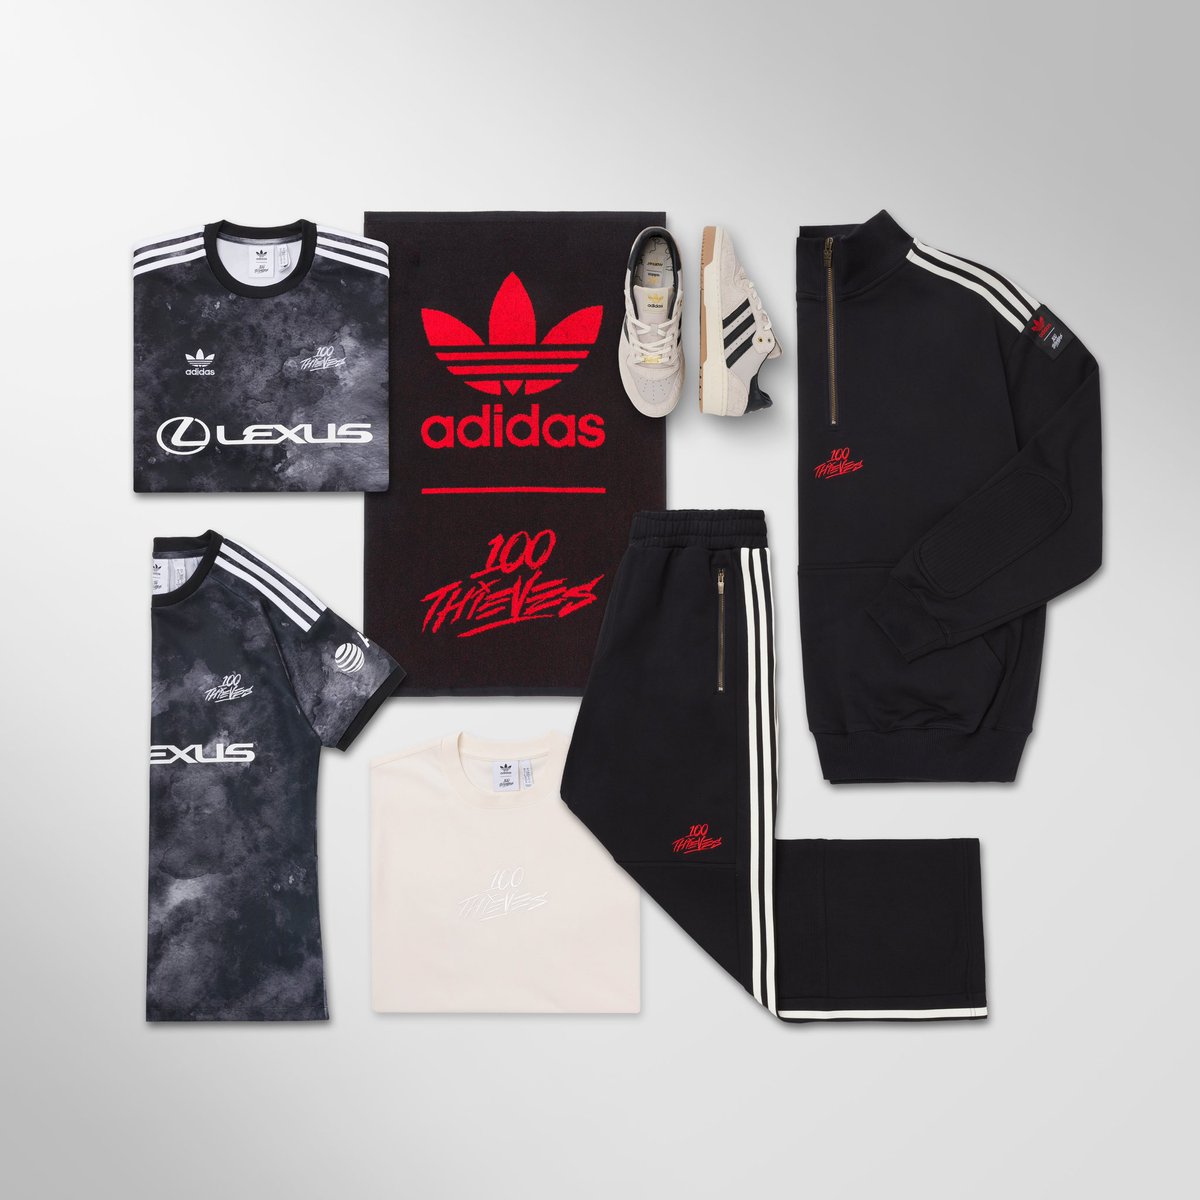 100 Thieves x @adidasoriginals Full collection available 100Thieves.com with additional sizes available adidas.com